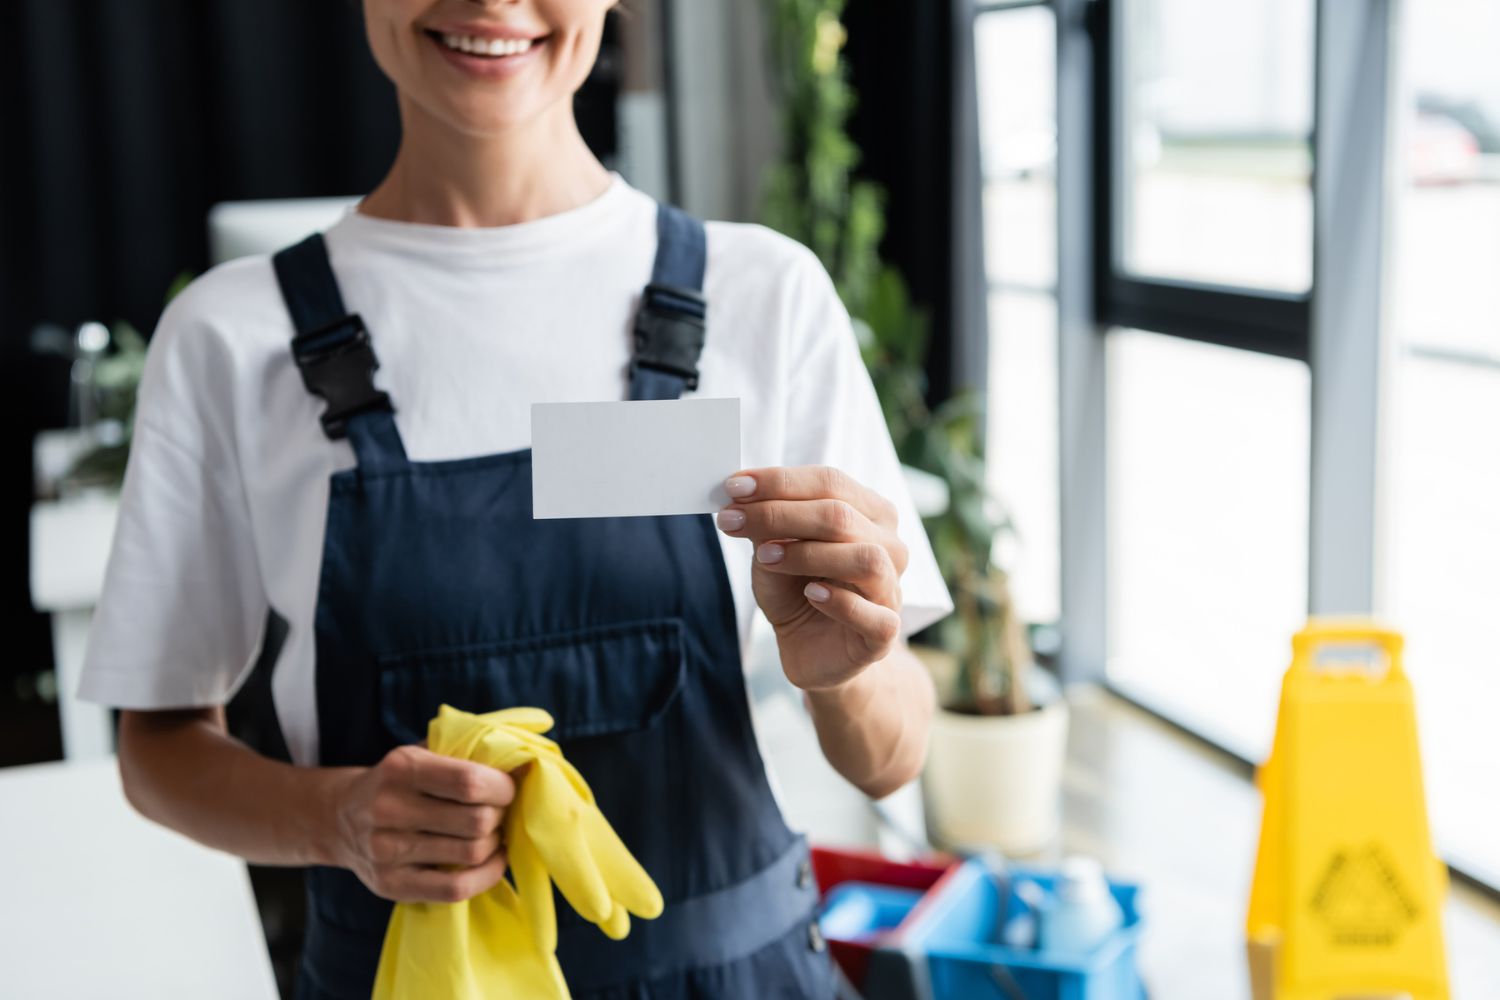 How to Get Clients for a Cleaning Business: Professional window cleaner showcasing their cleaning services on a business card